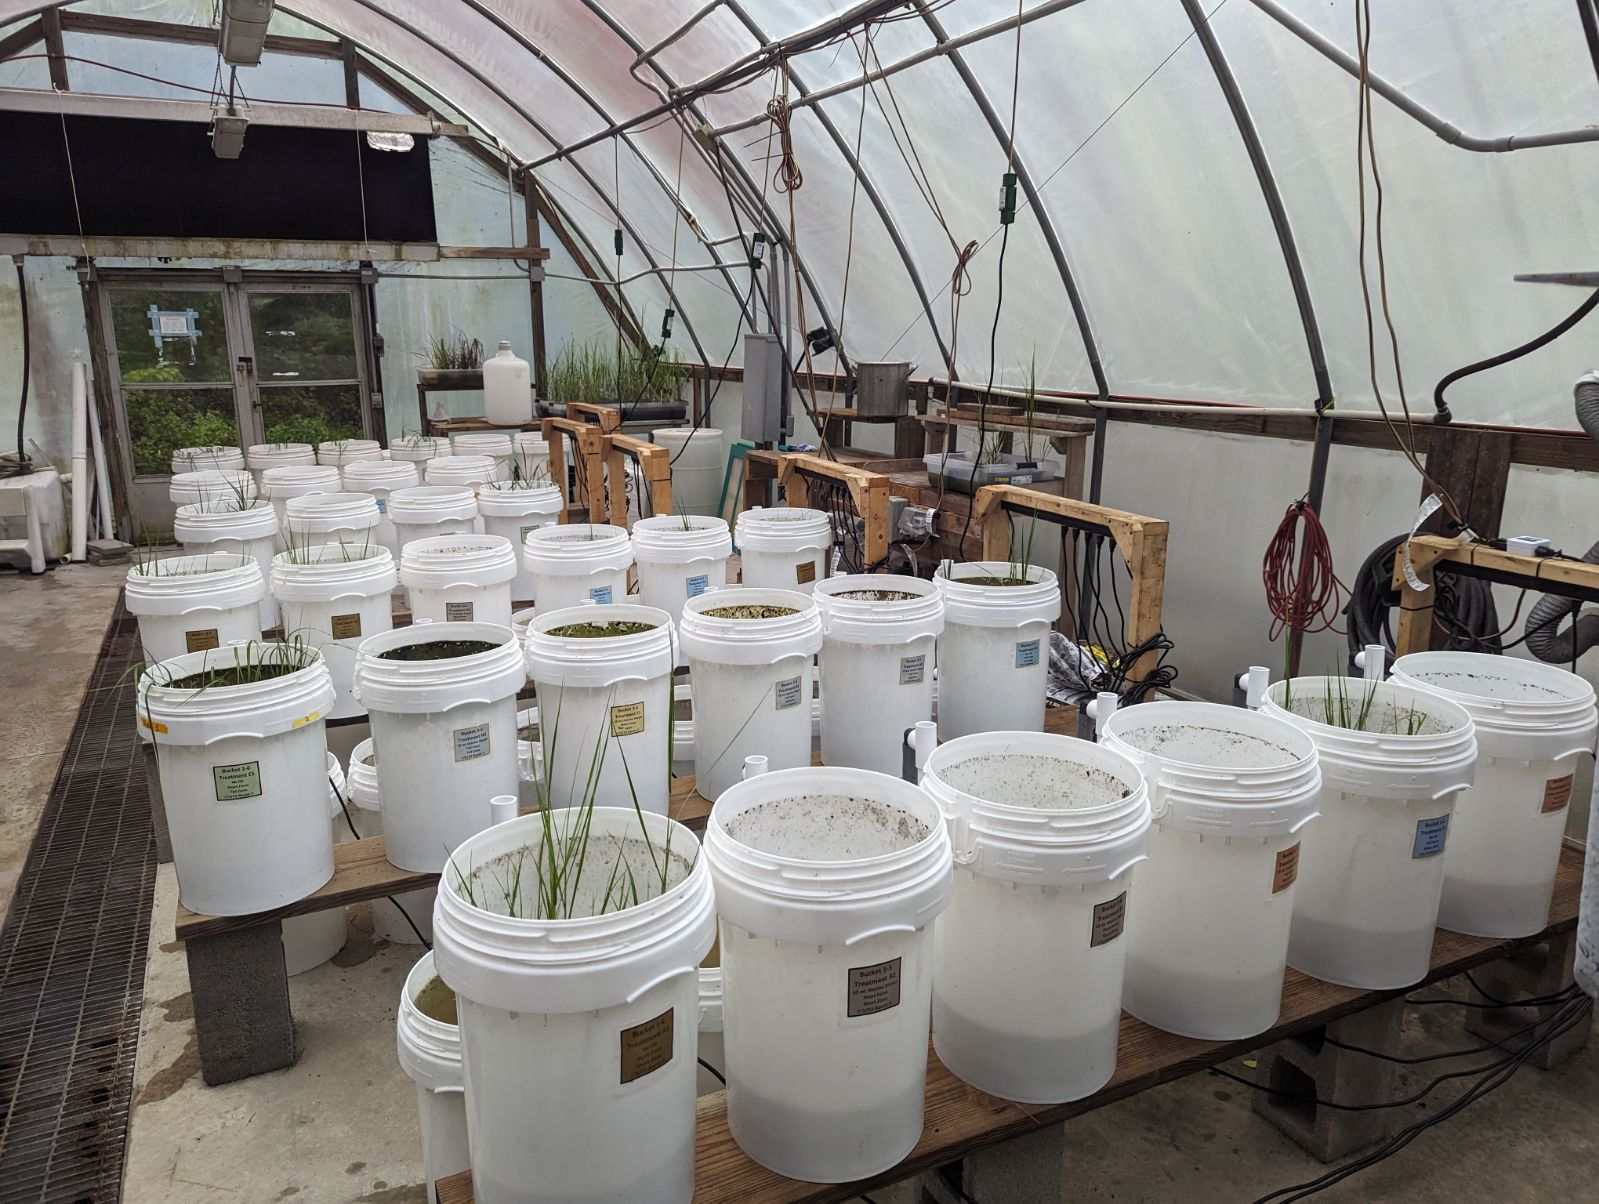 Several rows of 12 gallon buckets on raised benches. Tall grass sticks out of some buckets.